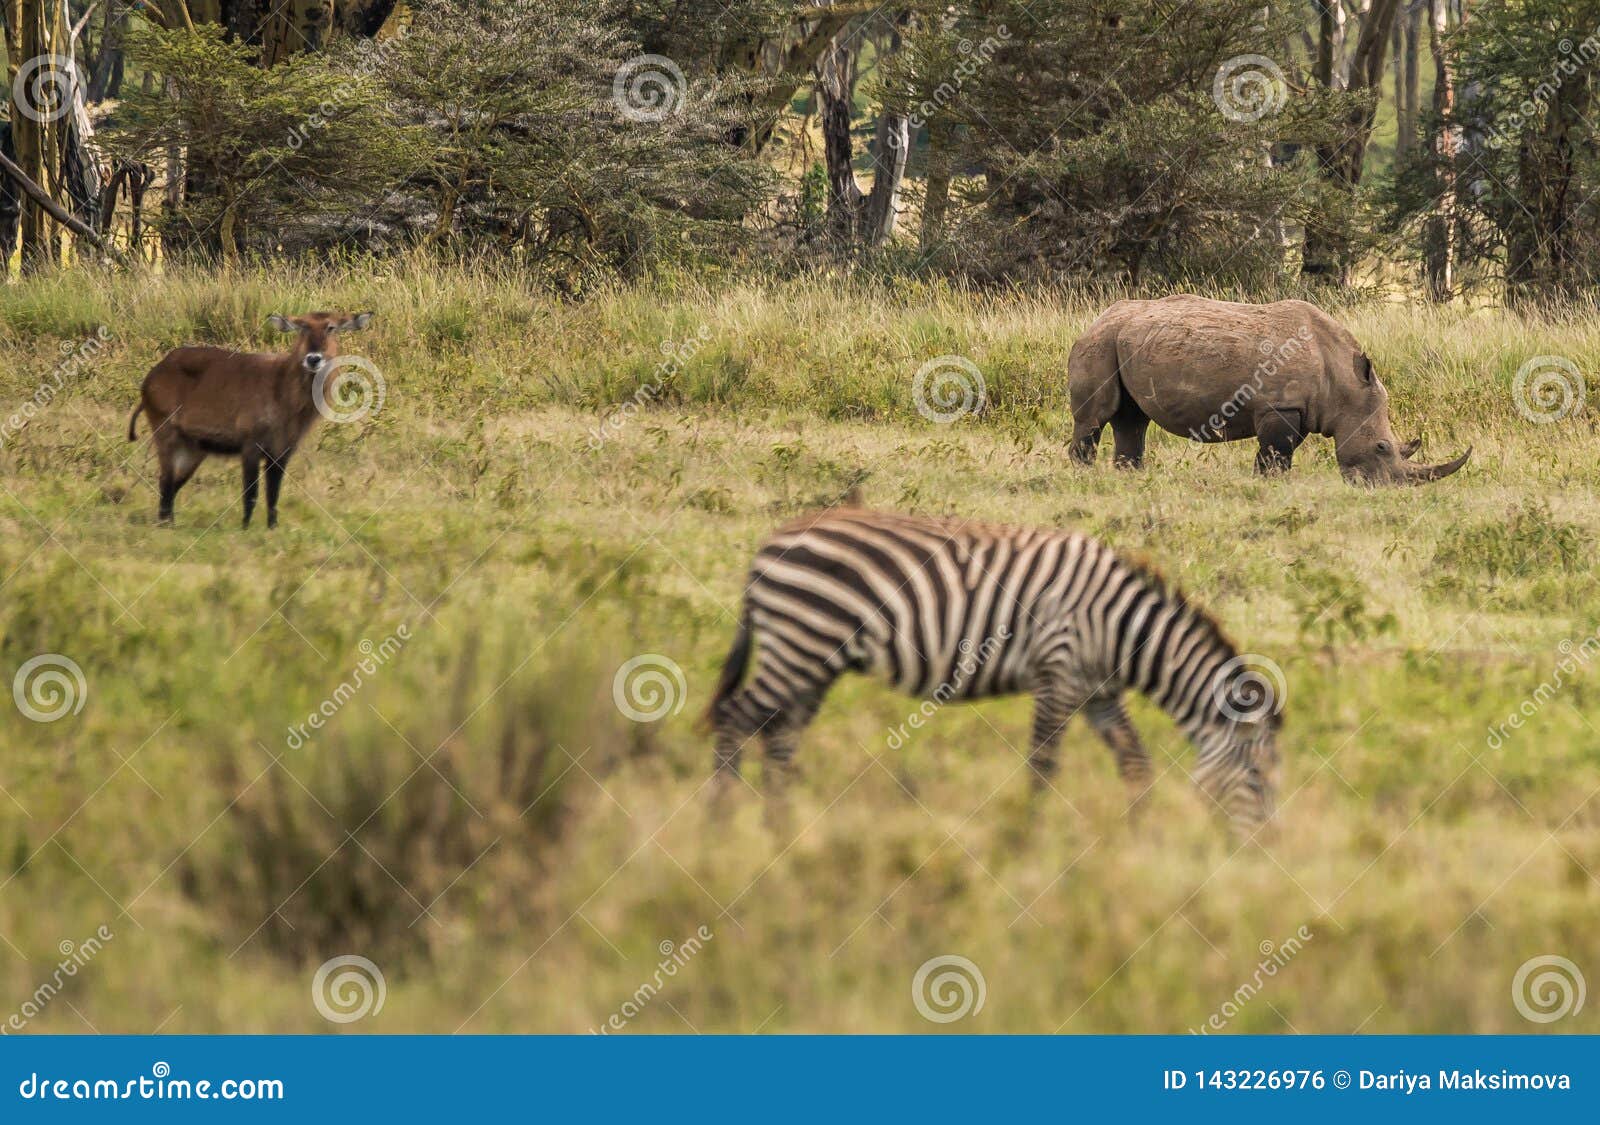 White Rhino and Other Animals Grazing in a Shroud Near Lake Nakuru in Kenya  in Africa Stock Photo - Image of reserve, natural: 143226976